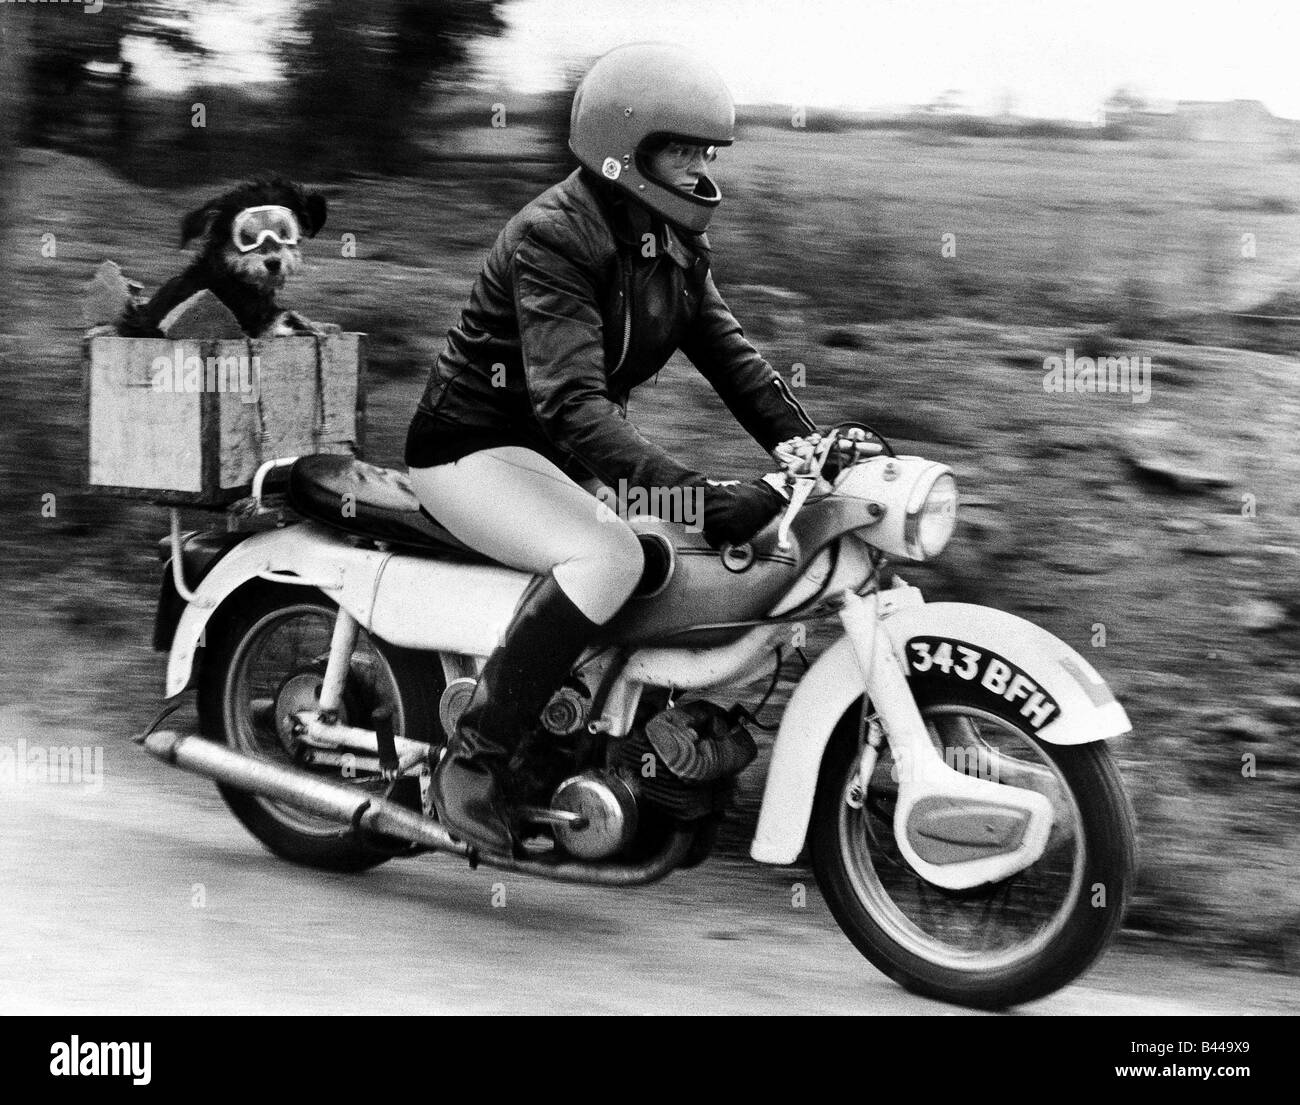 Sue Maddock 21 and her dog Moth who she transports around in the pillion box on her motorbike Dog wearing goggles Motor cycle Stock Photo